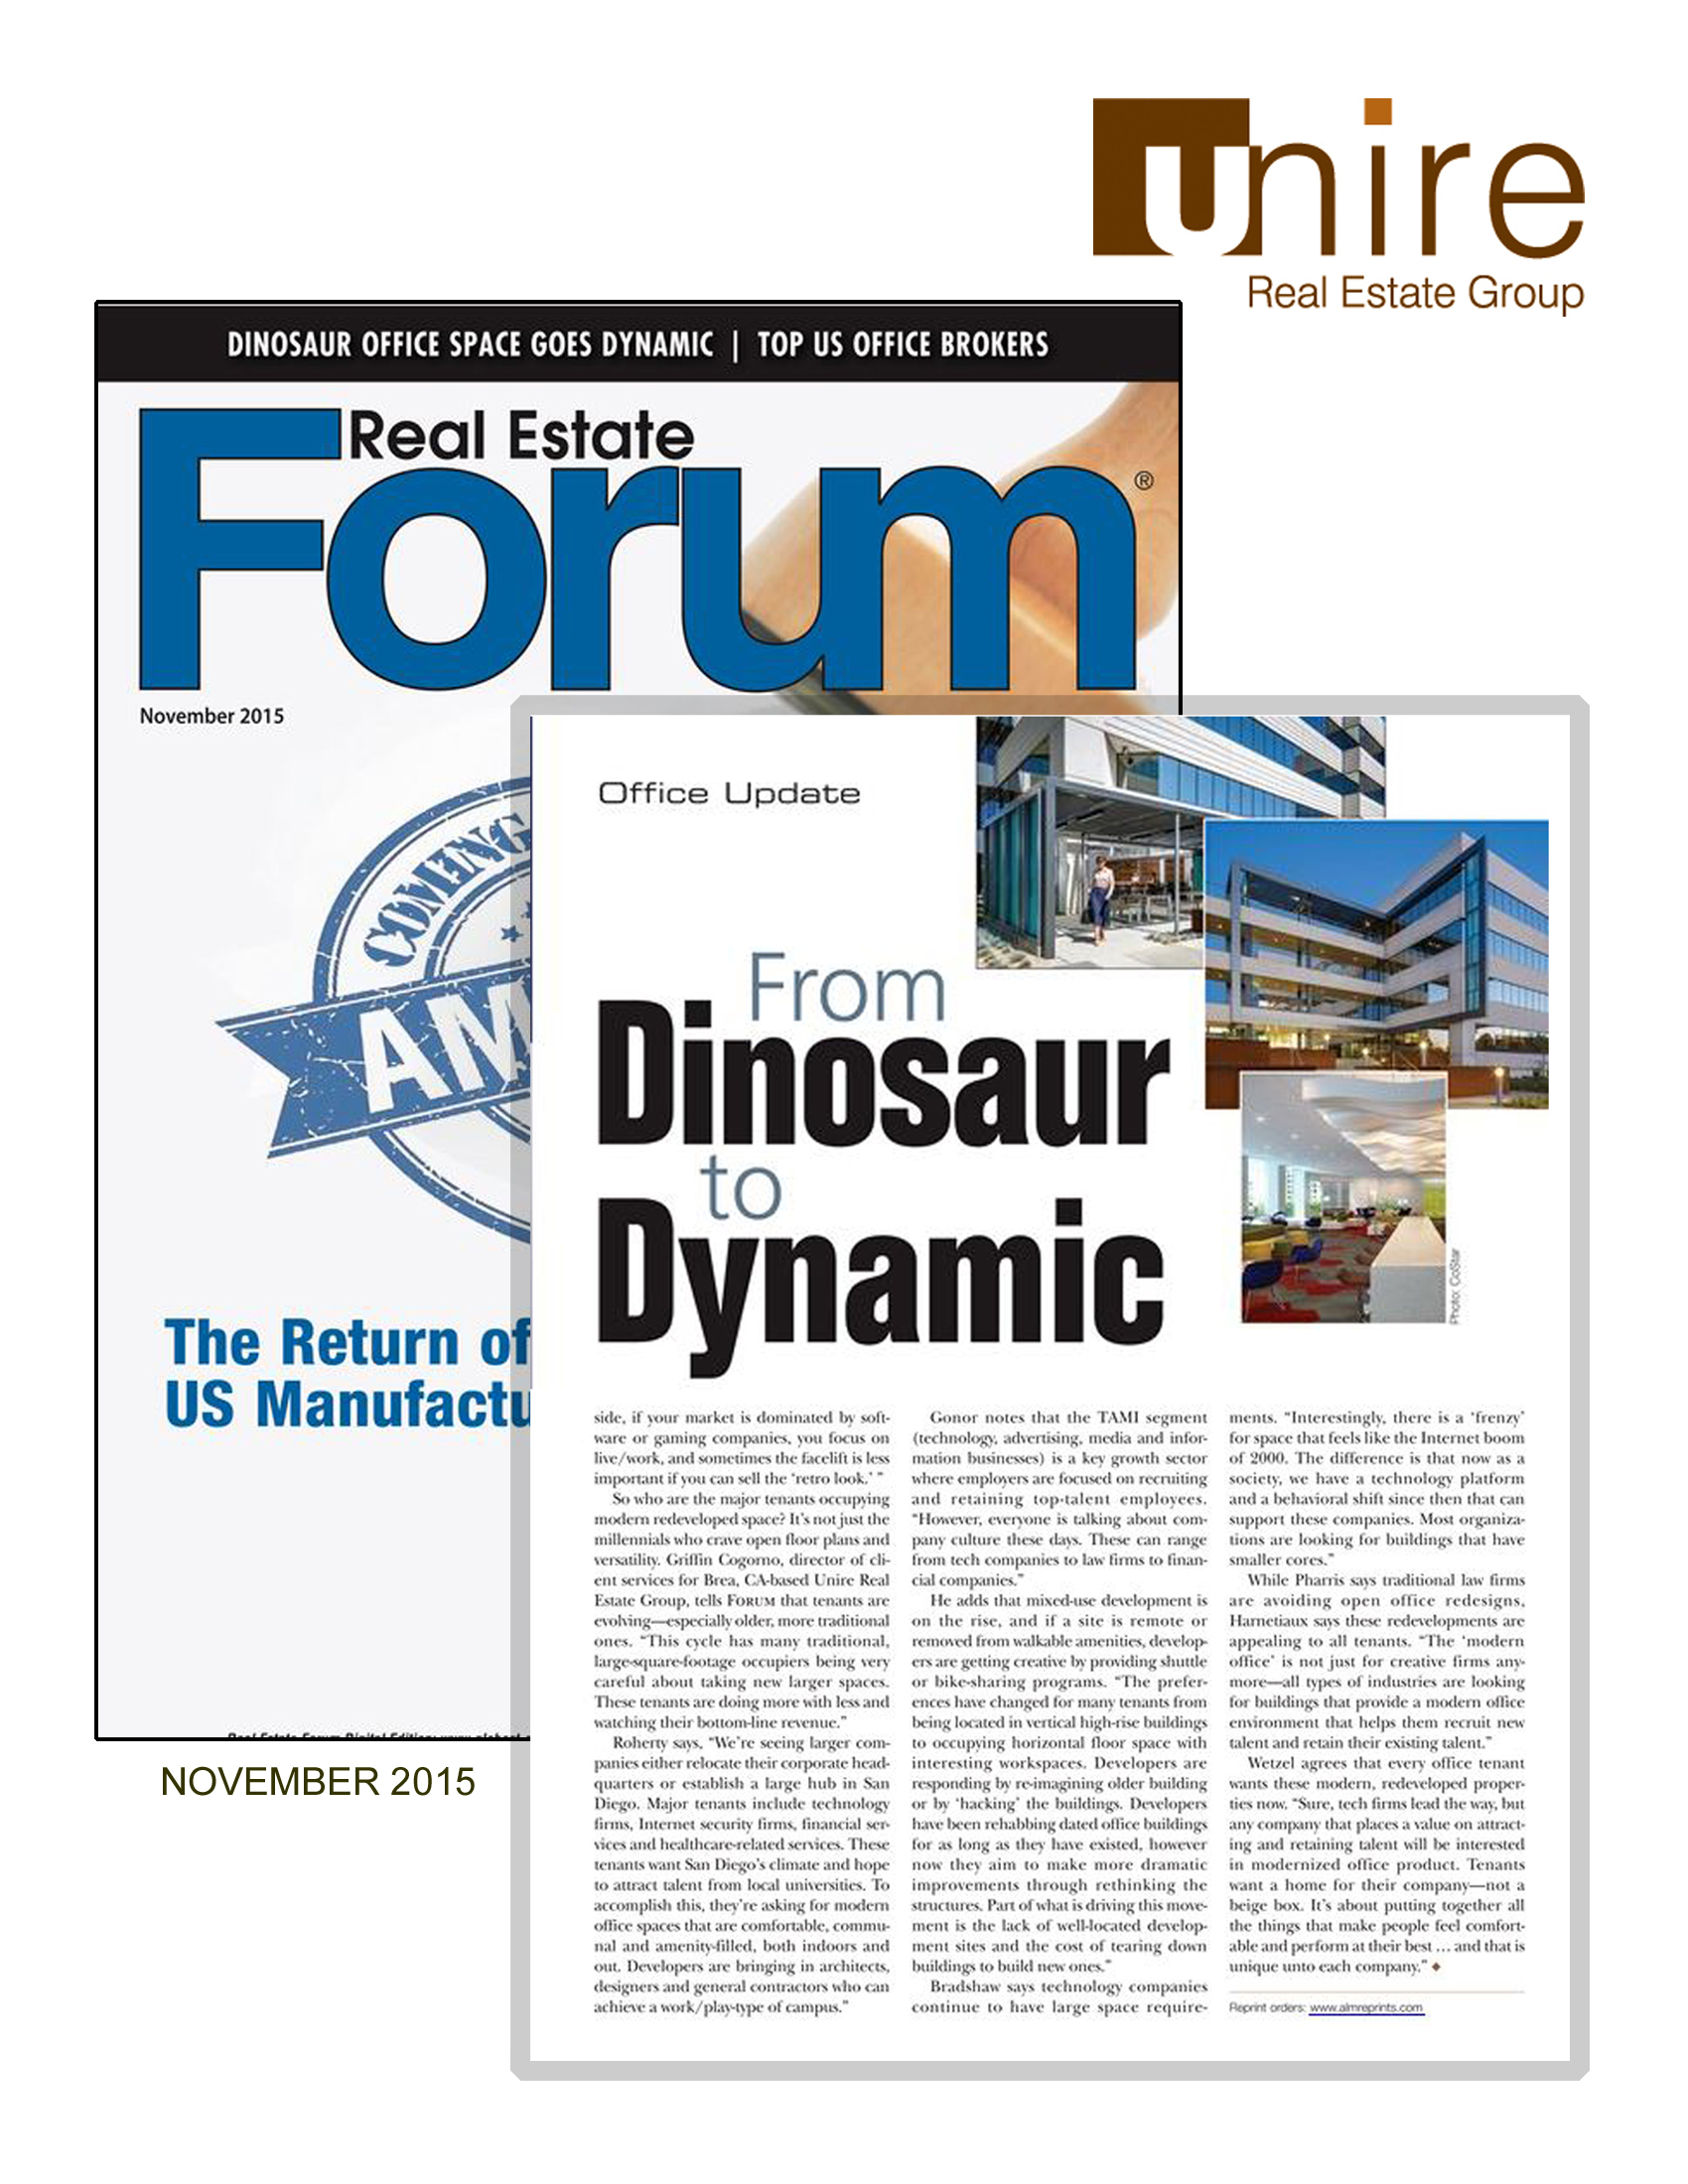 Real Estate Forum - From Dinosaur to Dynamic